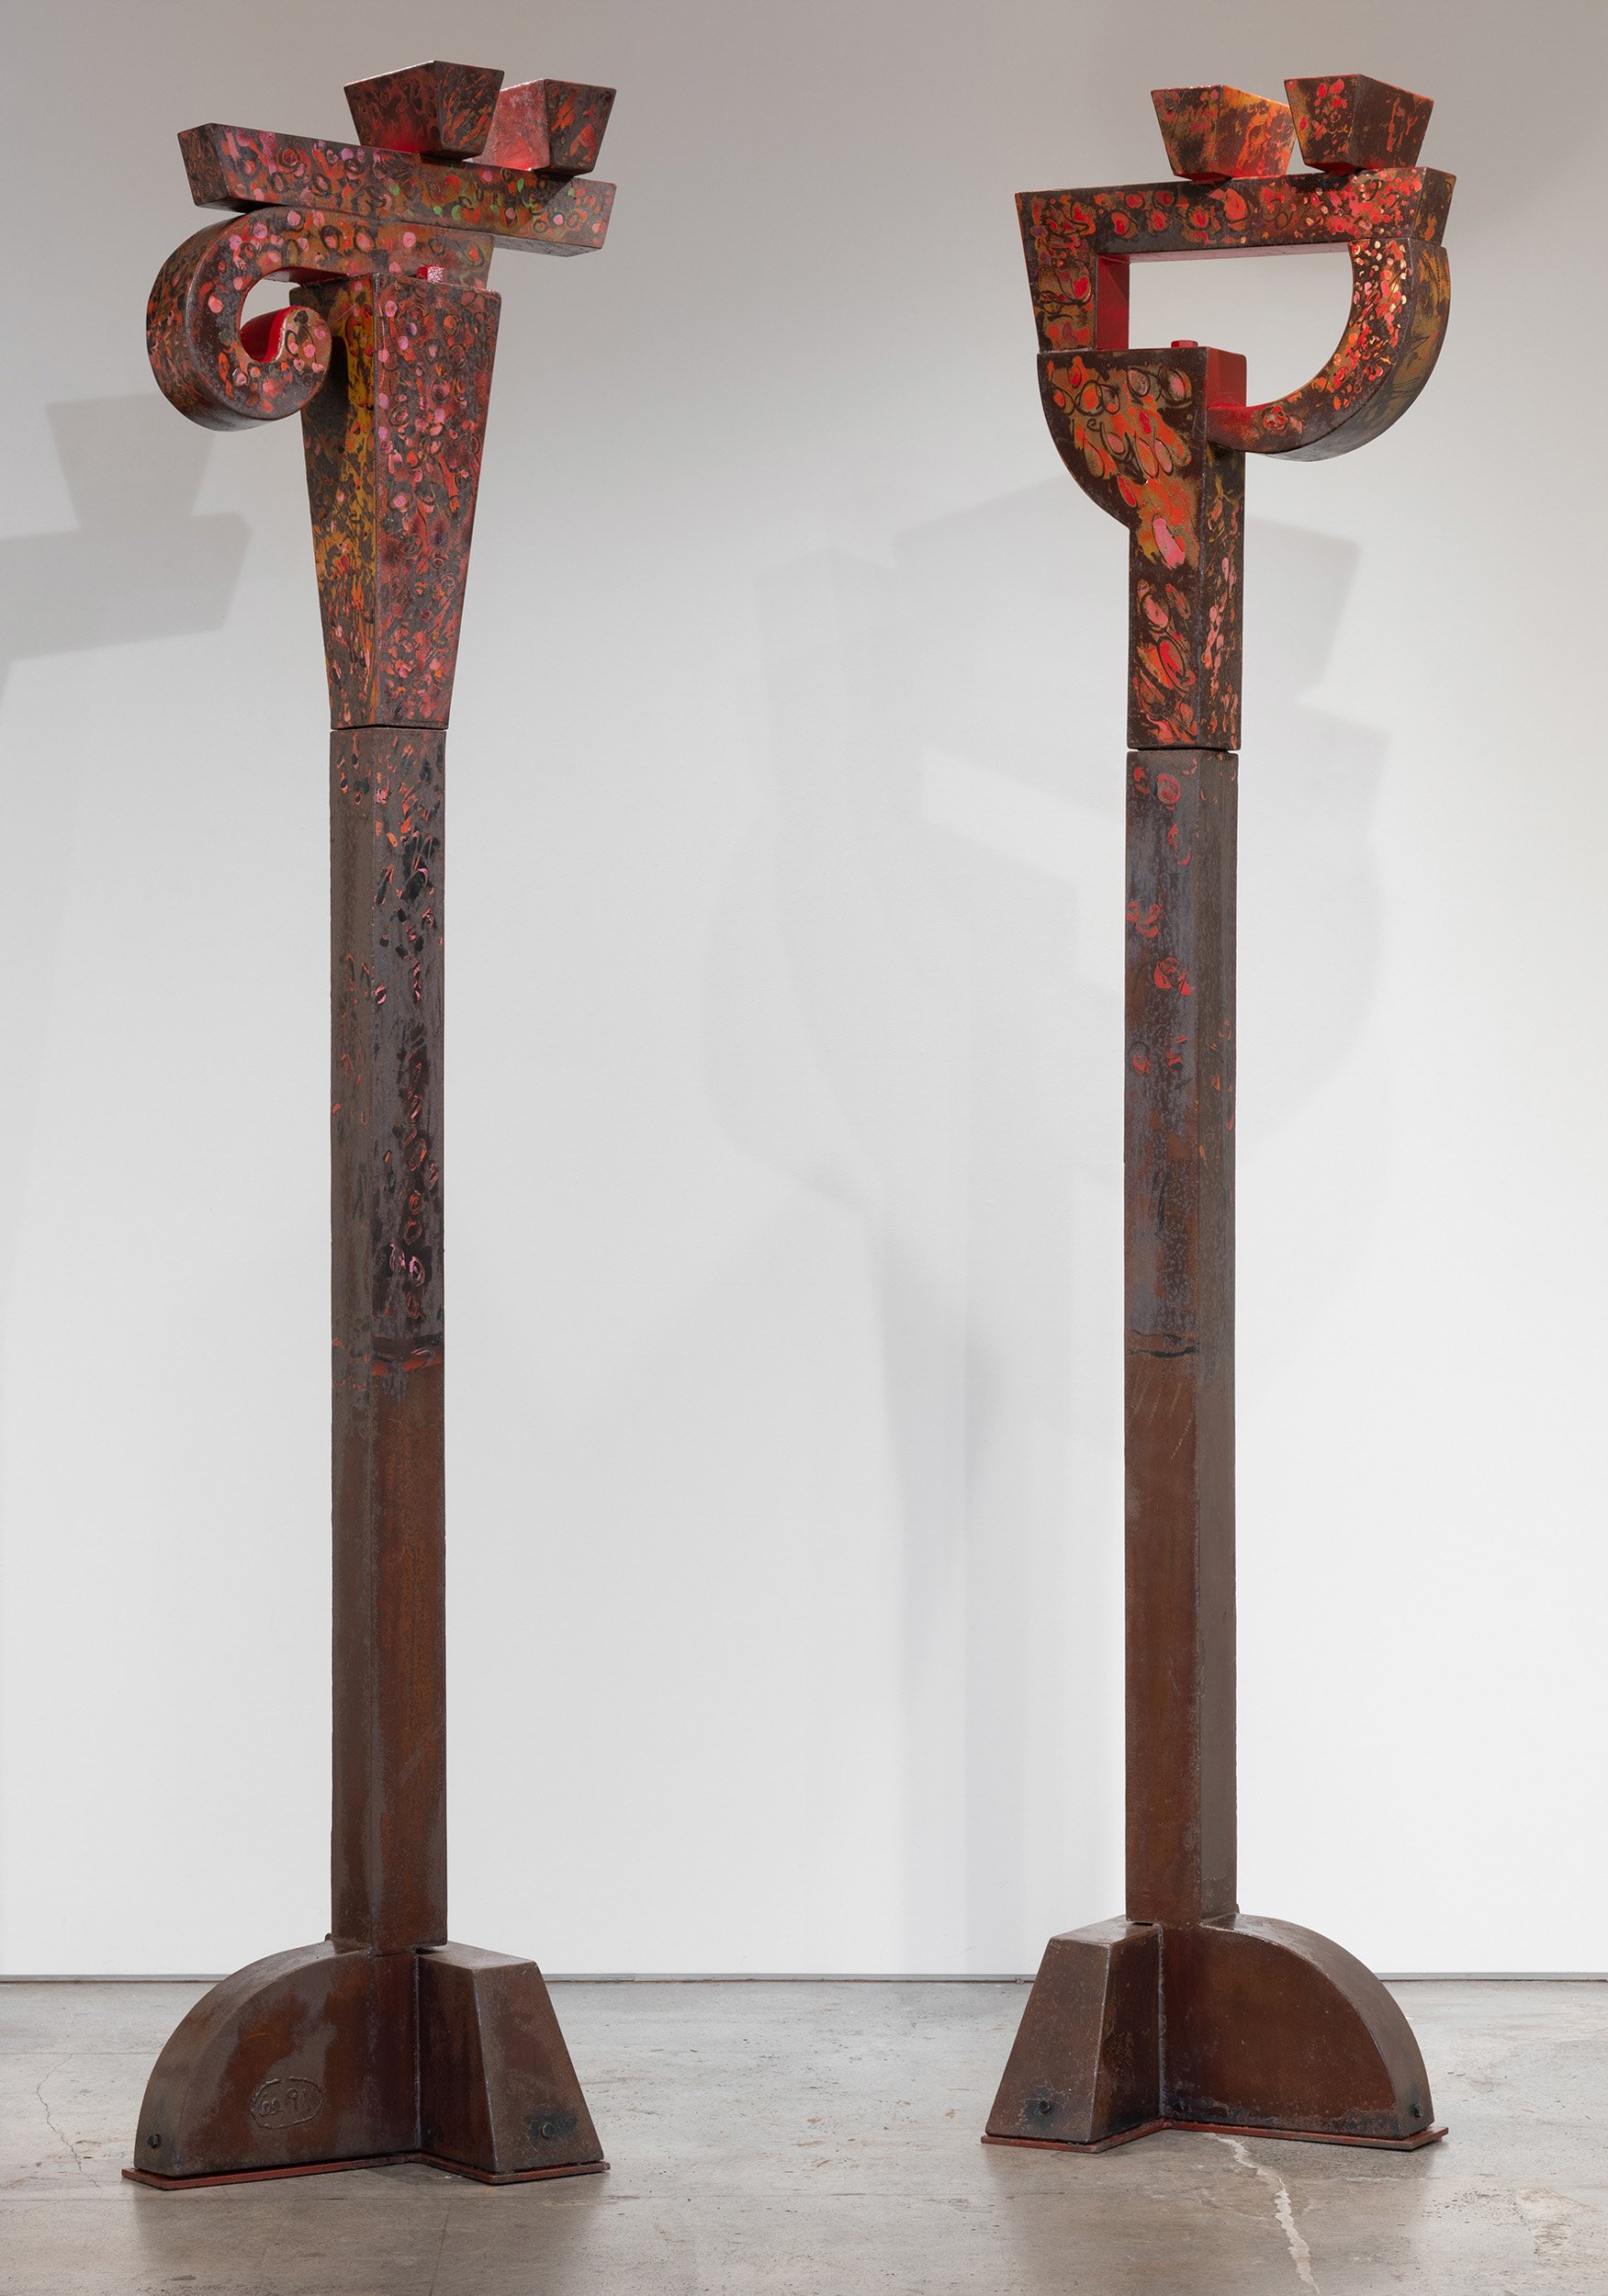   Rajasthani Columns , 1992 weathered steel and acrylic urethane paint 126 x 24 x 24" each (pair) 